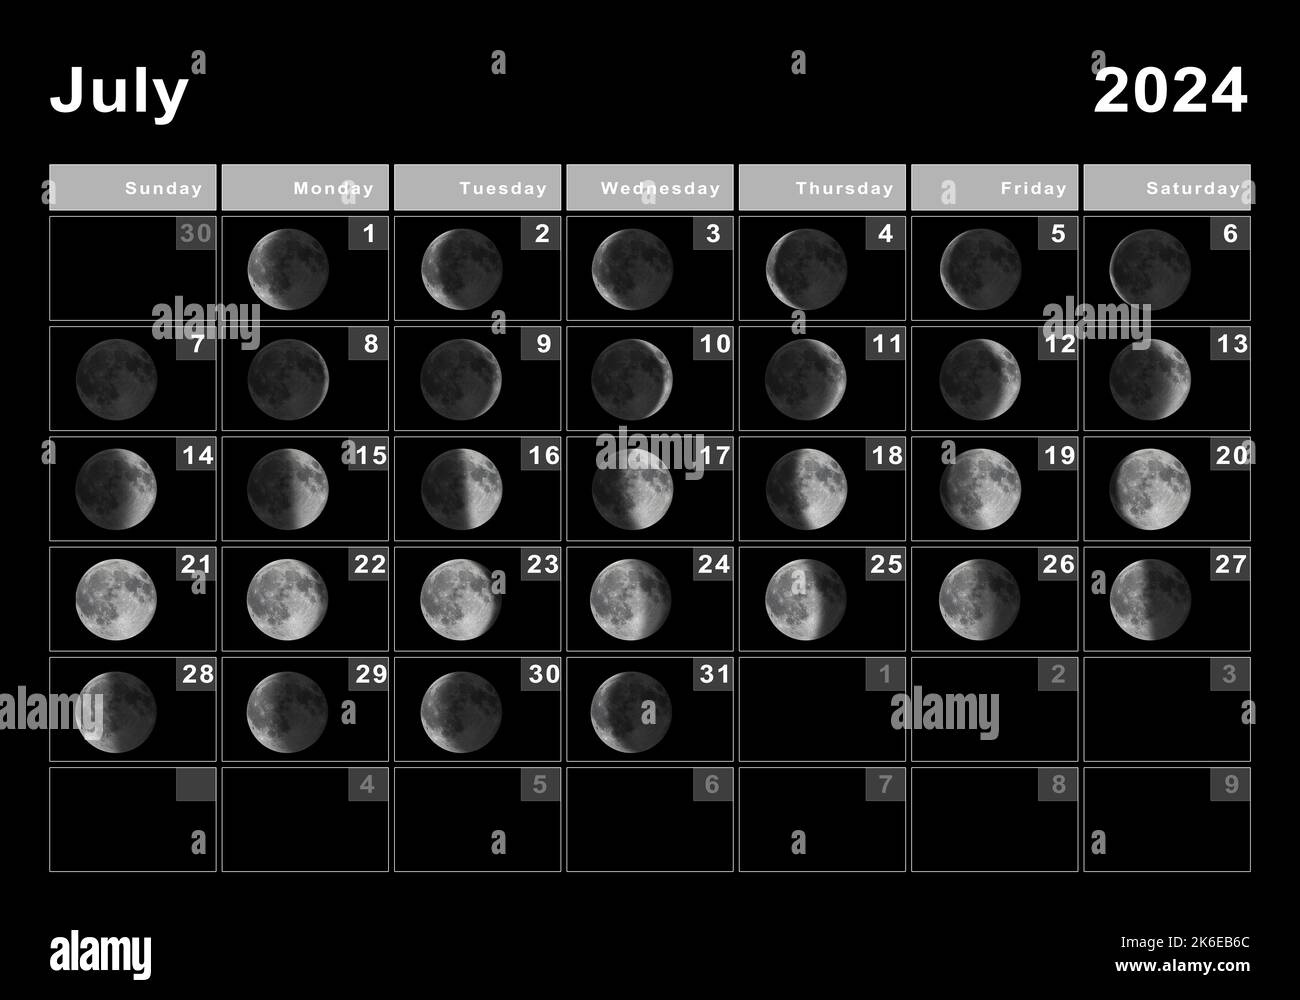 July 2024 Lunar Calendar, Moon Cycles, Moon Phases Stock Photo - Alamy with regard to July 20th Lunar Calendar 2024